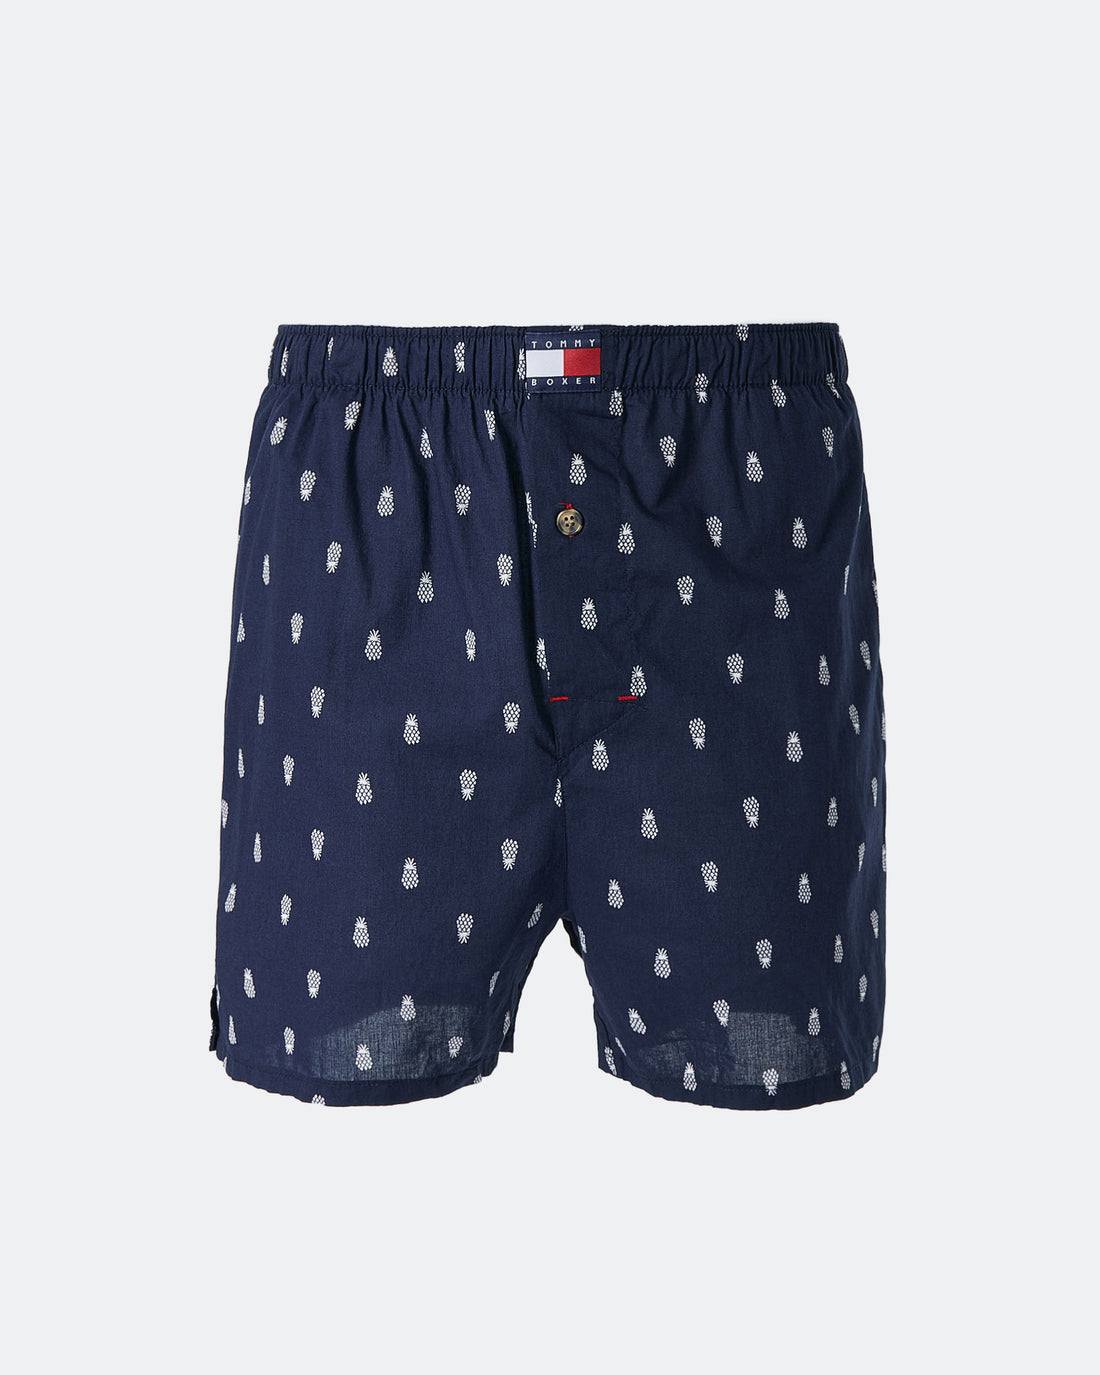 TH Pineapple Over Printed Men Boxer 6.90